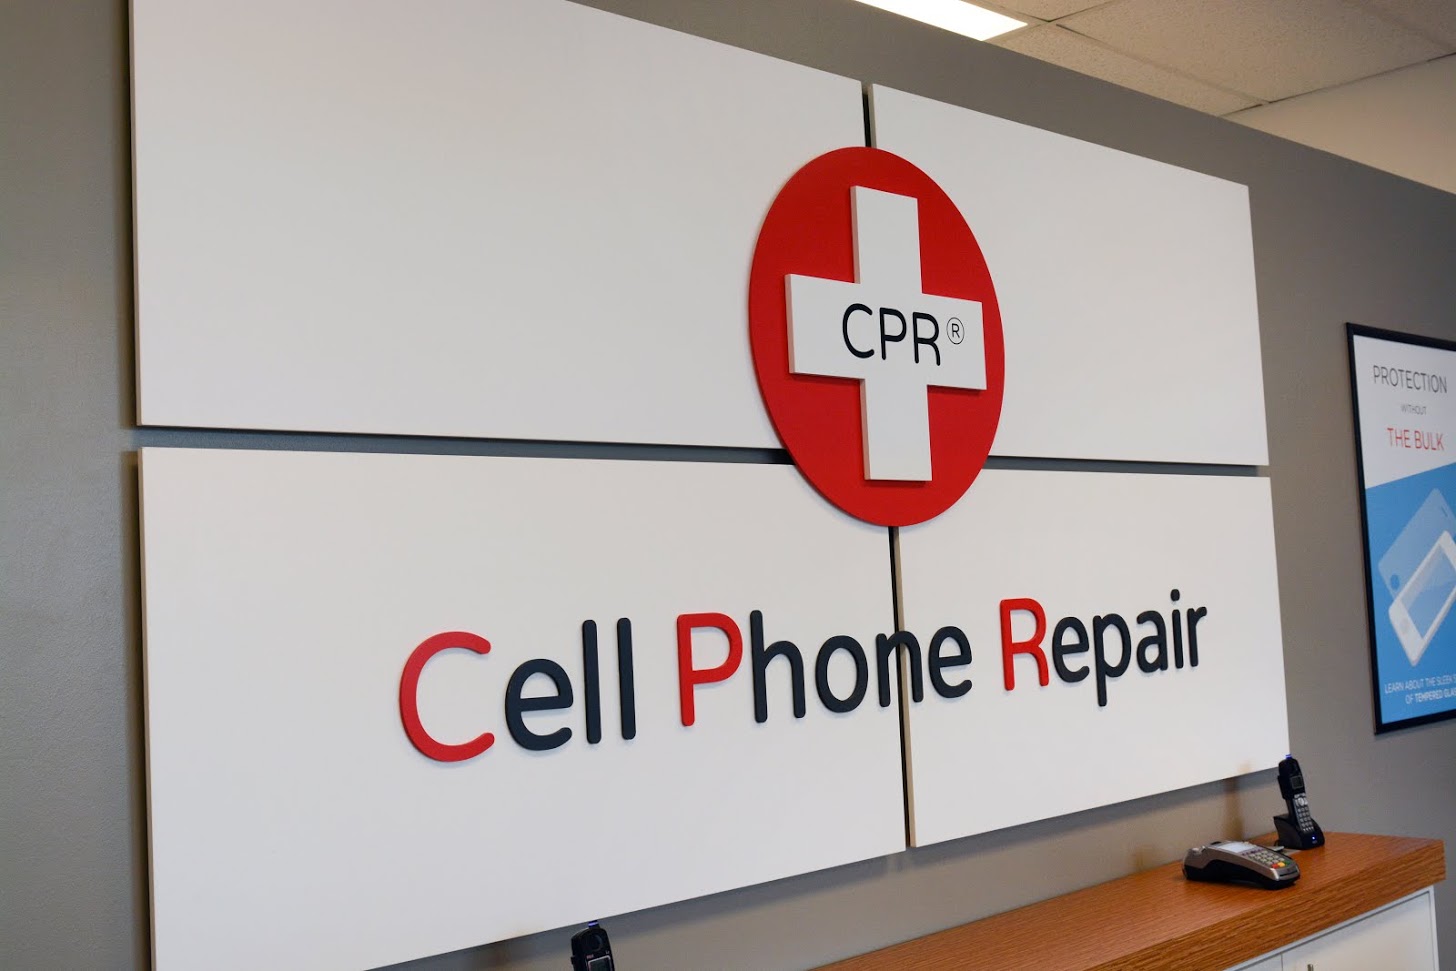 CPR Cell Phone Repair, Thursday, December 19, 2019, Press release picture